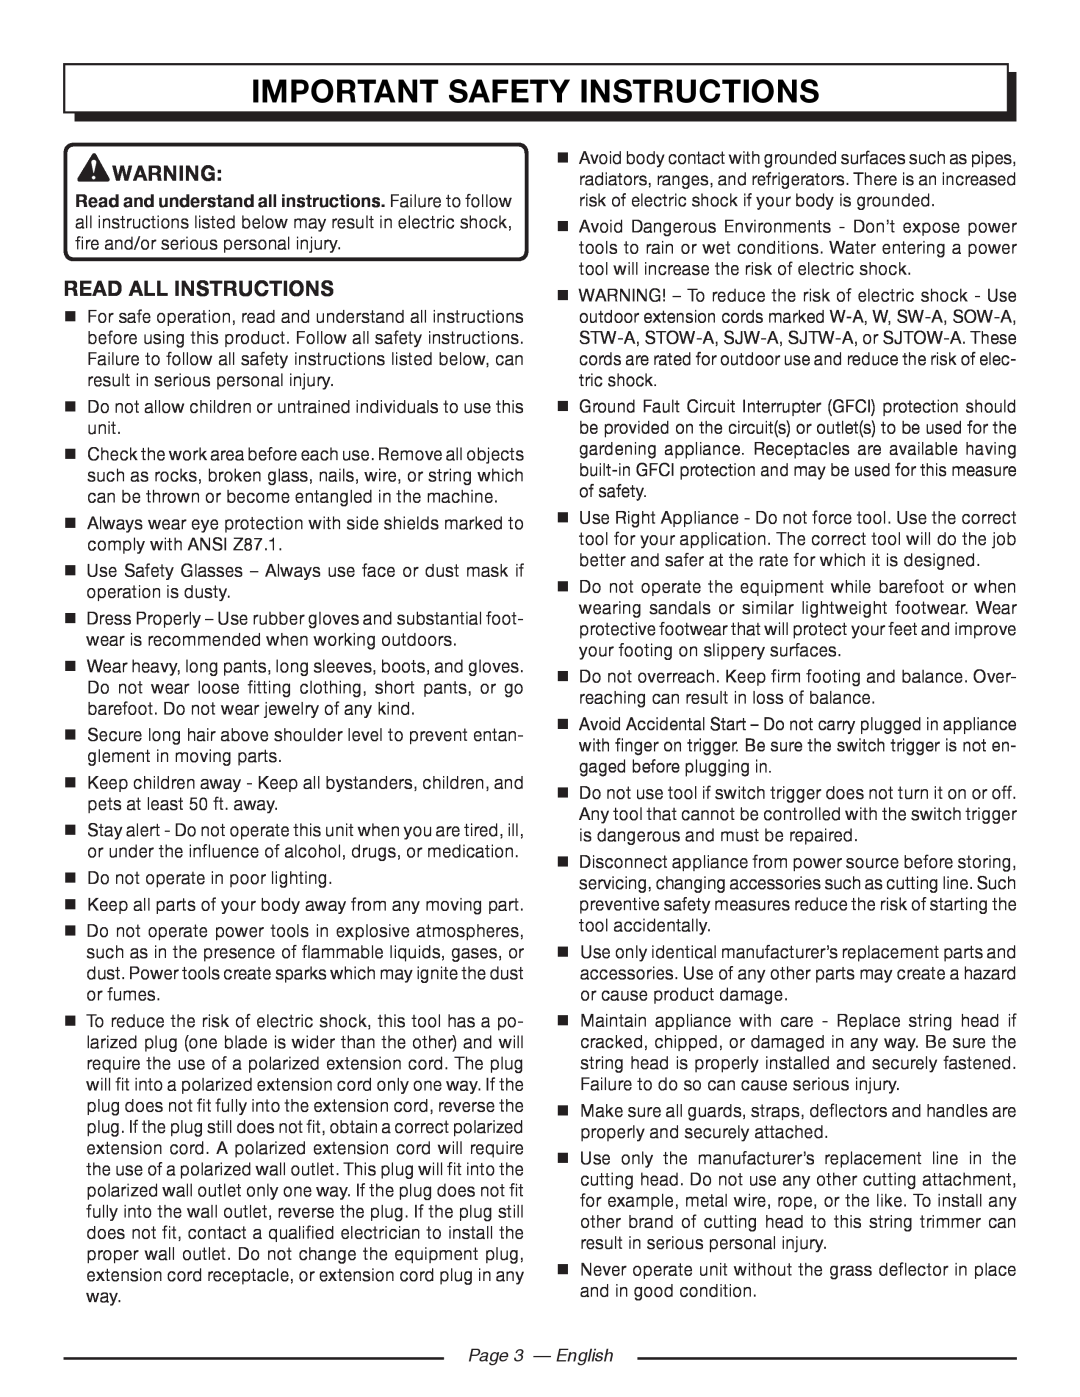 Homelite UT41112 manuel dutilisation Important Safety Instructions, read all instructions, Page 3 - English 